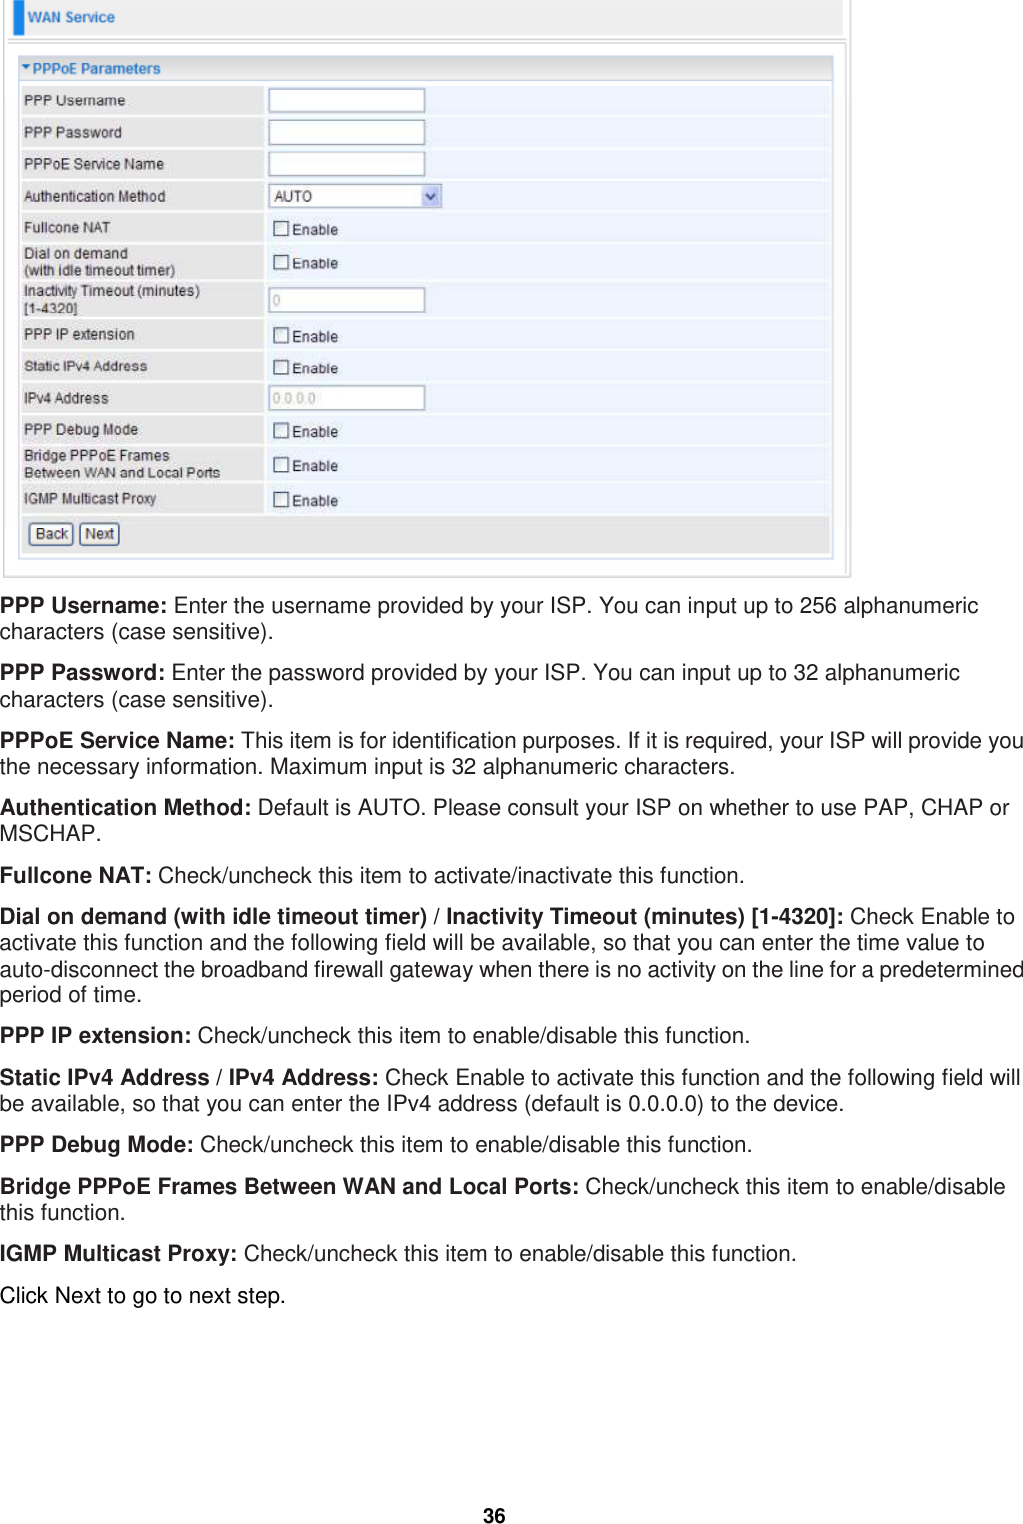  36  PPP Username: Enter the username provided by your ISP. You can input up to 256 alphanumeric characters (case sensitive).  PPP Password: Enter the password provided by your ISP. You can input up to 32 alphanumeric characters (case sensitive). PPPoE Service Name: This item is for identification purposes. If it is required, your ISP will provide you the necessary information. Maximum input is 32 alphanumeric characters. Authentication Method: Default is AUTO. Please consult your ISP on whether to use PAP, CHAP or MSCHAP. Fullcone NAT: Check/uncheck this item to activate/inactivate this function. Dial on demand (with idle timeout timer) / Inactivity Timeout (minutes) [1-4320]: Check Enable to activate this function and the following field will be available, so that you can enter the time value to auto-disconnect the broadband firewall gateway when there is no activity on the line for a predetermined period of time. PPP IP extension: Check/uncheck this item to enable/disable this function.  Static IPv4 Address / IPv4 Address: Check Enable to activate this function and the following field will be available, so that you can enter the IPv4 address (default is 0.0.0.0) to the device. PPP Debug Mode: Check/uncheck this item to enable/disable this function.  Bridge PPPoE Frames Between WAN and Local Ports: Check/uncheck this item to enable/disable this function.  IGMP Multicast Proxy: Check/uncheck this item to enable/disable this function.  Click Next to go to next step. 